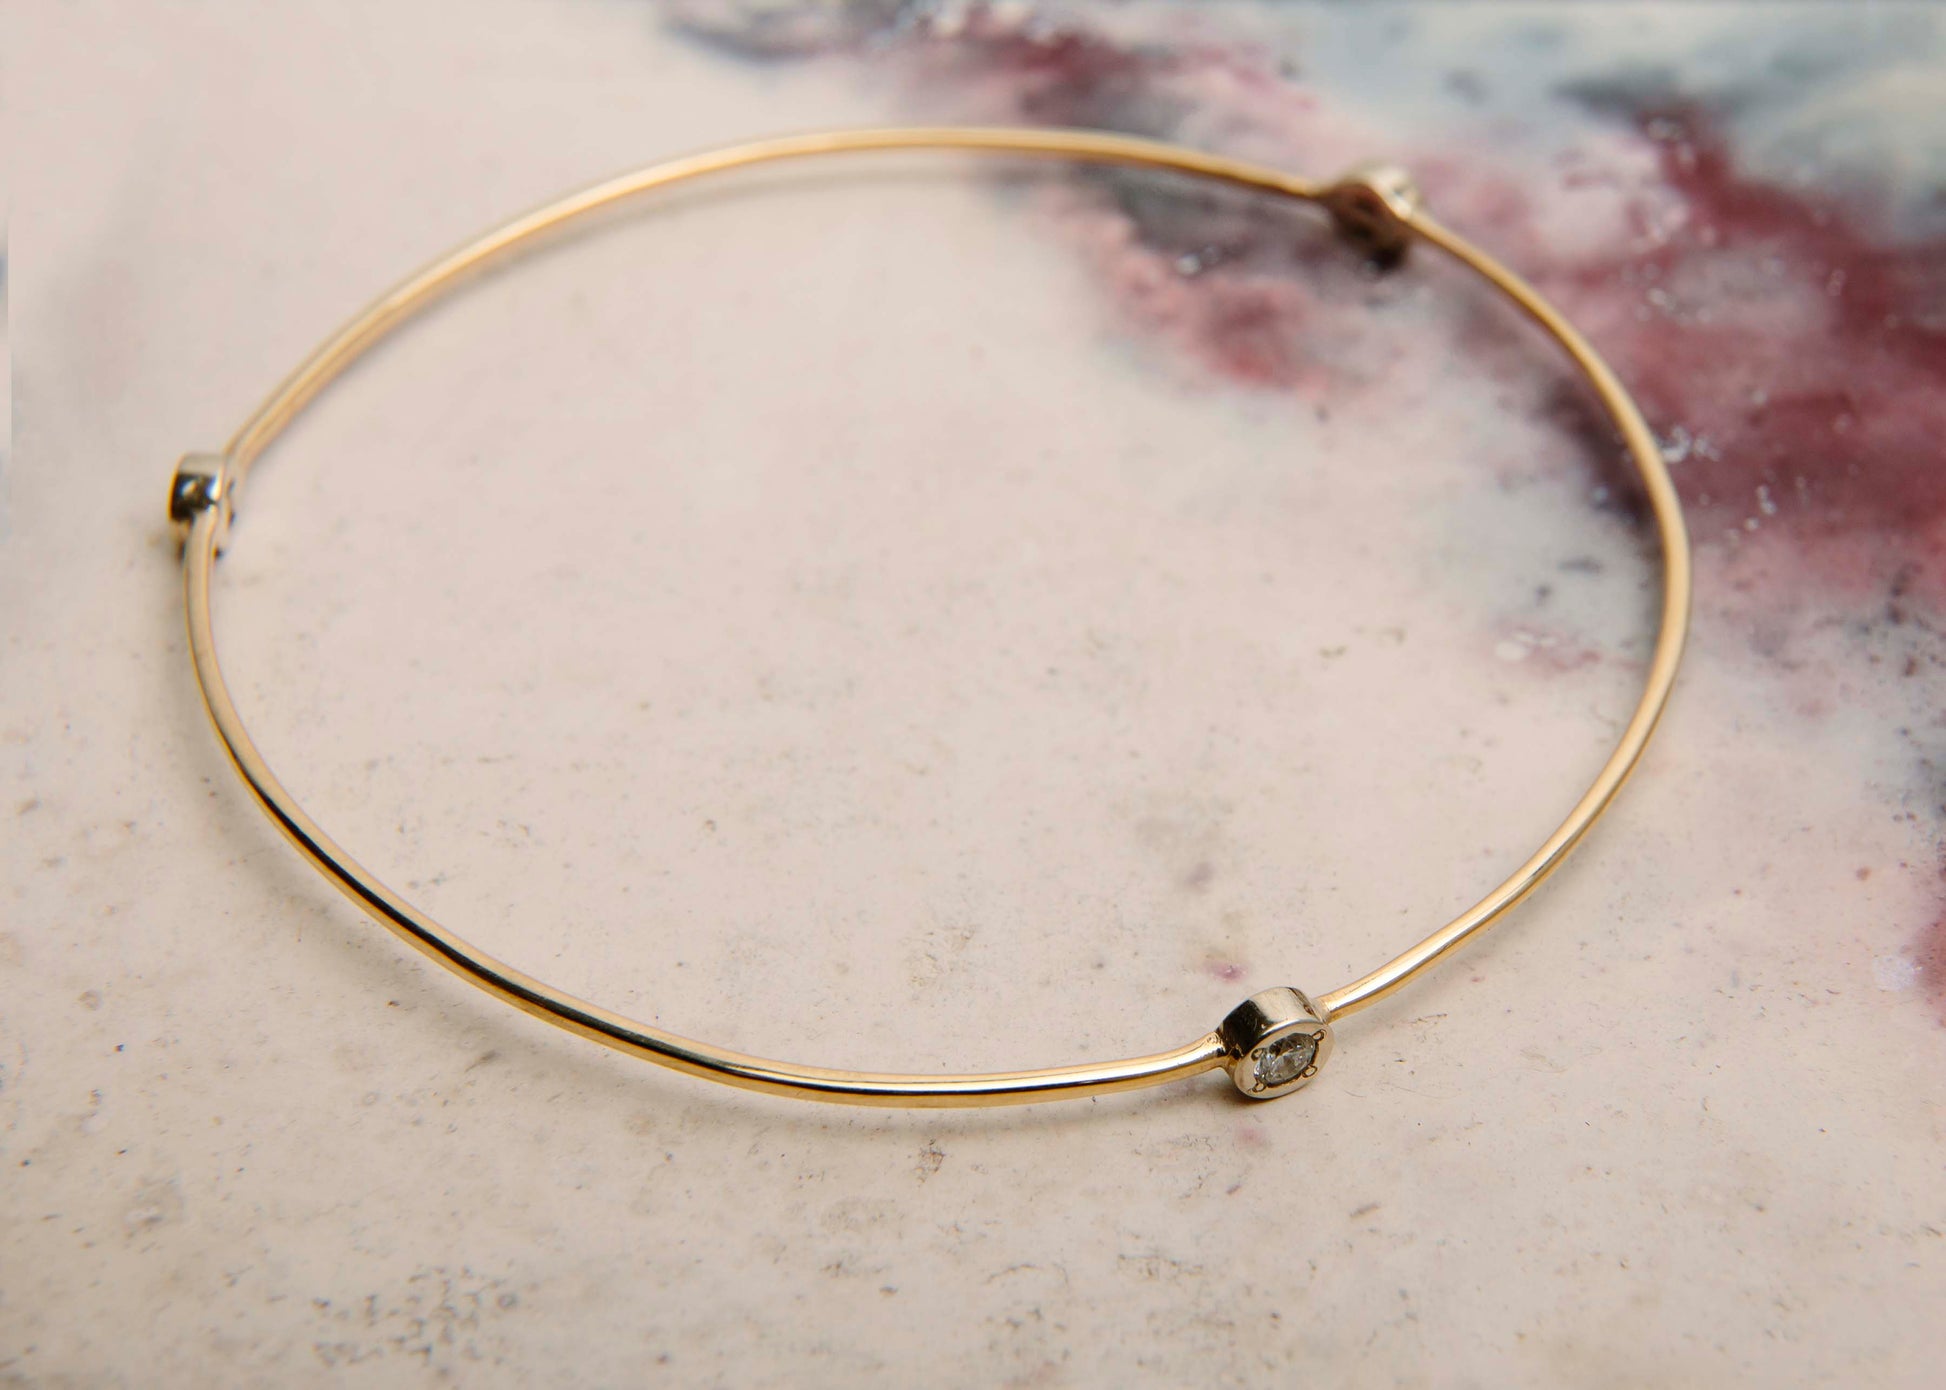 handmade solid gold bangle with diamond studs on pink marbled table